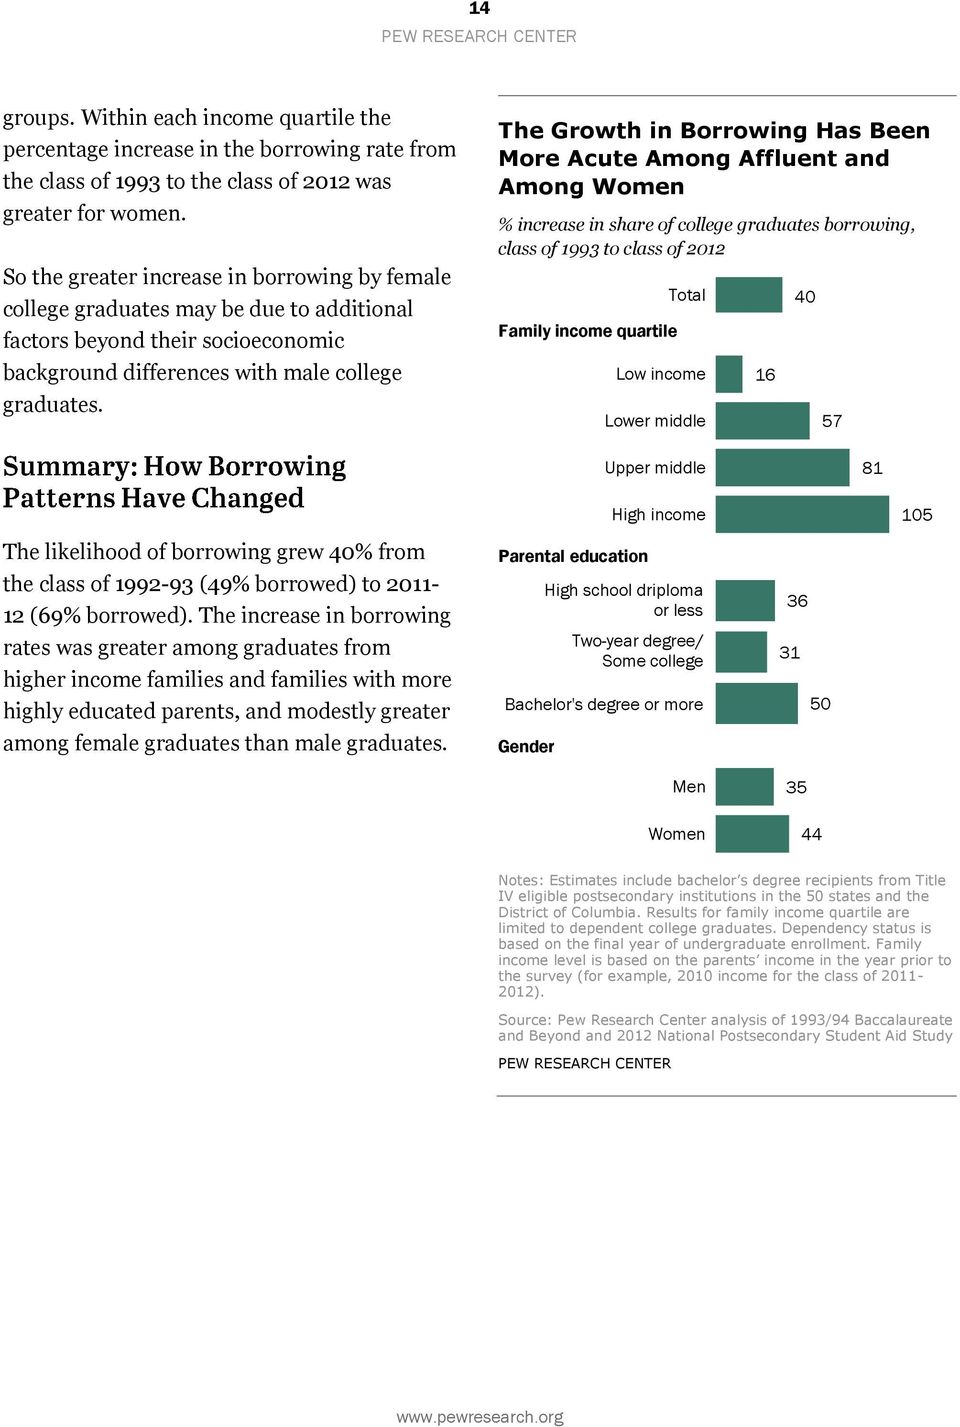 The Growth in Borrowing Has Been More Acute Among Affluent and Among Women % increase in share of college graduates borrowing, class of 1993 to class of 2012 Family income quartile Total Low income